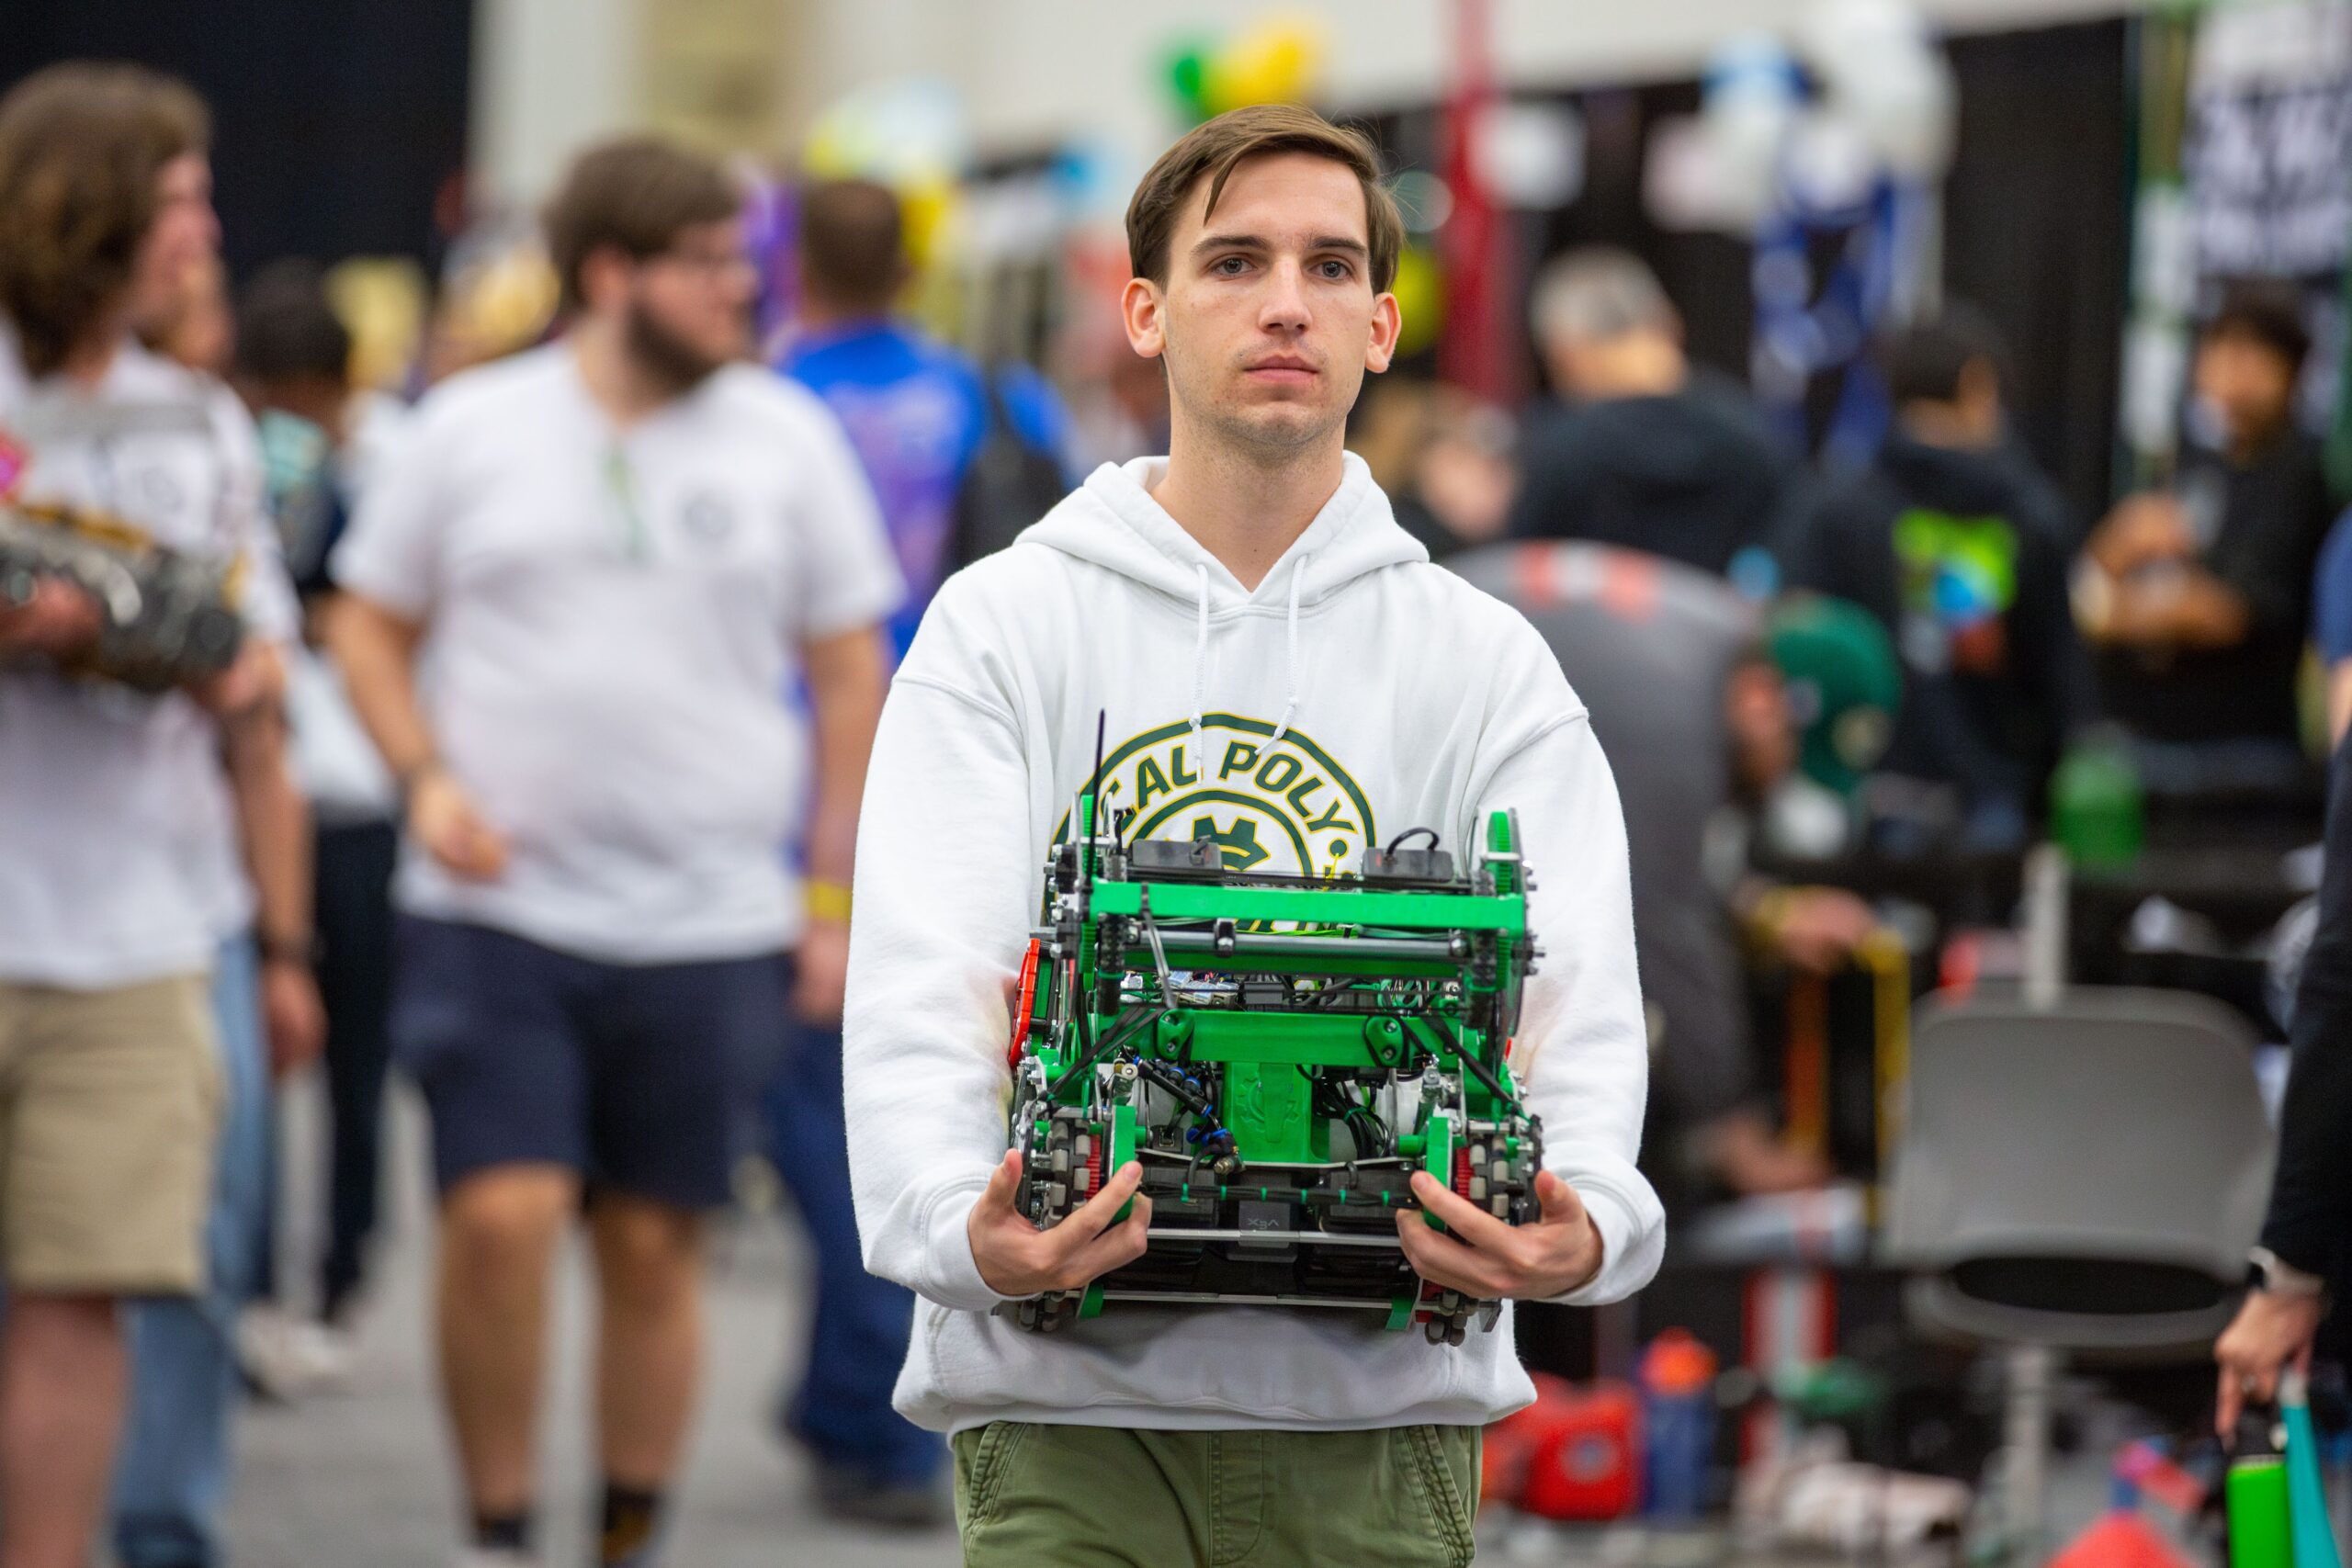 Project lead Garrett Schnack carries one of the Gear Slingers' robots through the convention center 